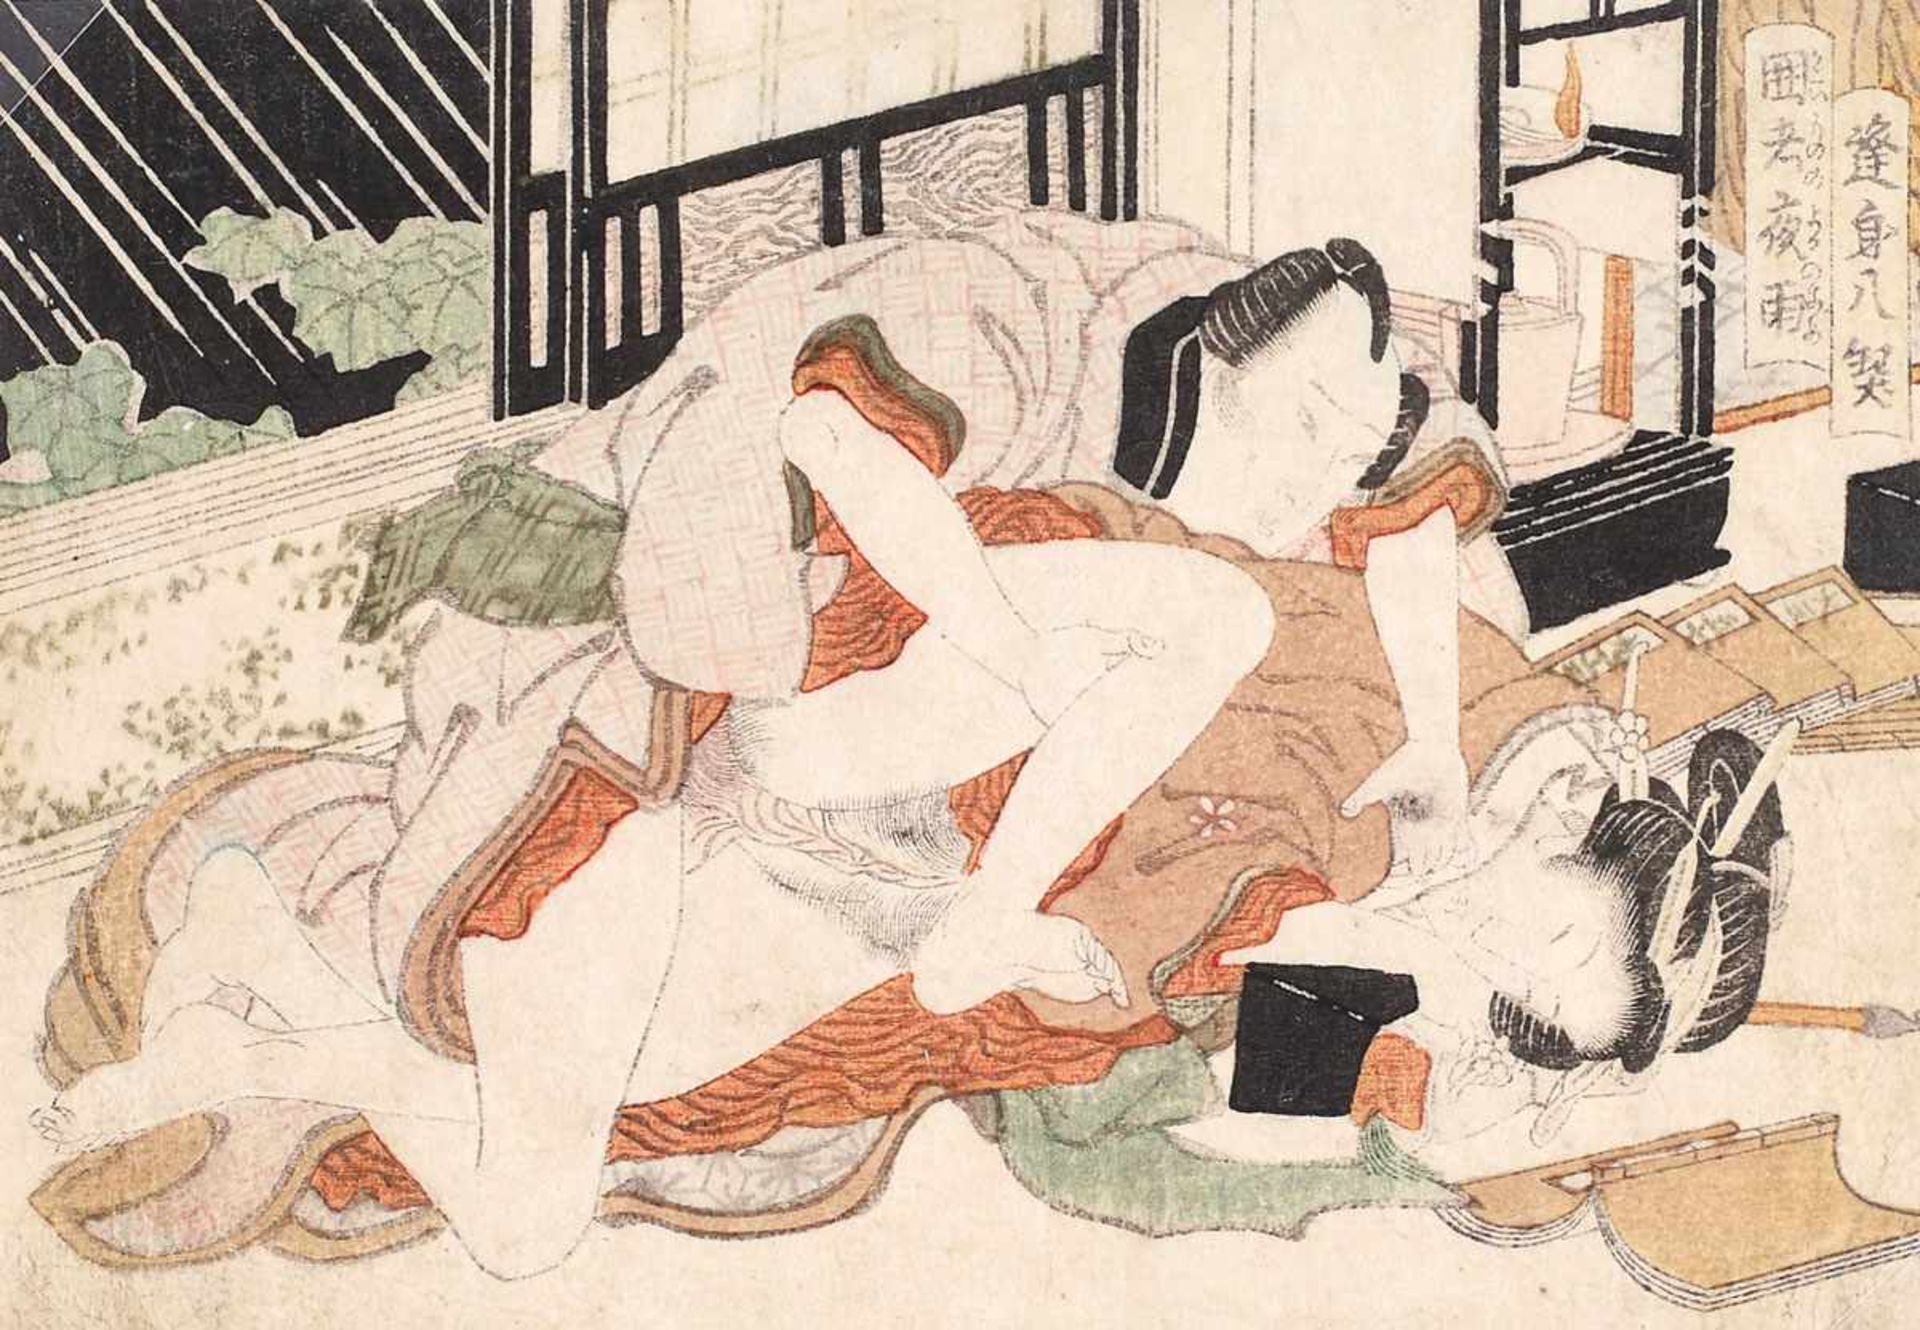 Shunga woodblock depicting a passional couple, ca 1800Shunga woodblock depicting a passional couple,